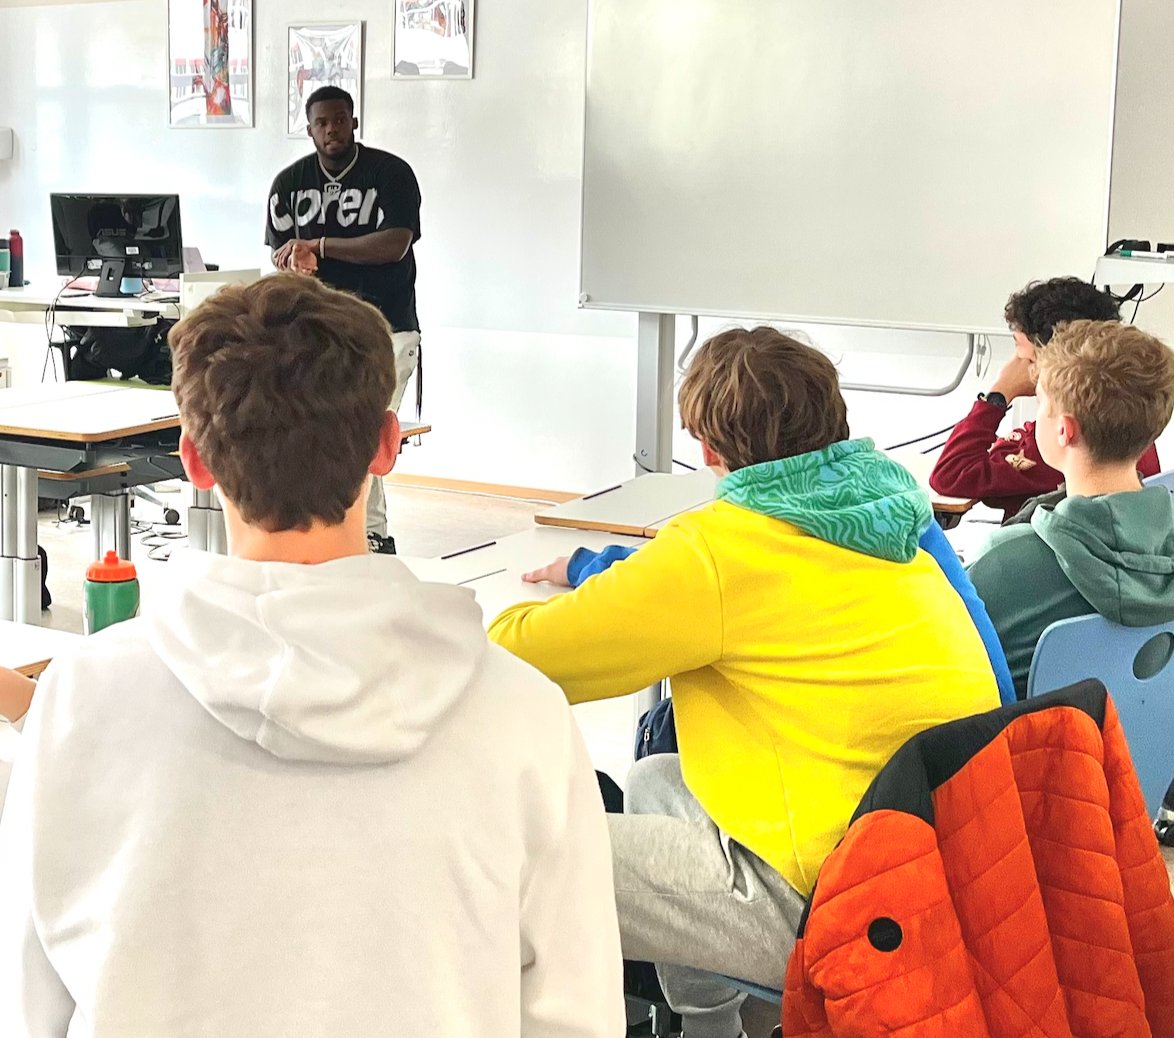 Huge thank you to #NFL @steelers @pharvin27 for stopping by @FIS_School today to talk to our student-athletes about life as a professional athlete. Inspiring words!